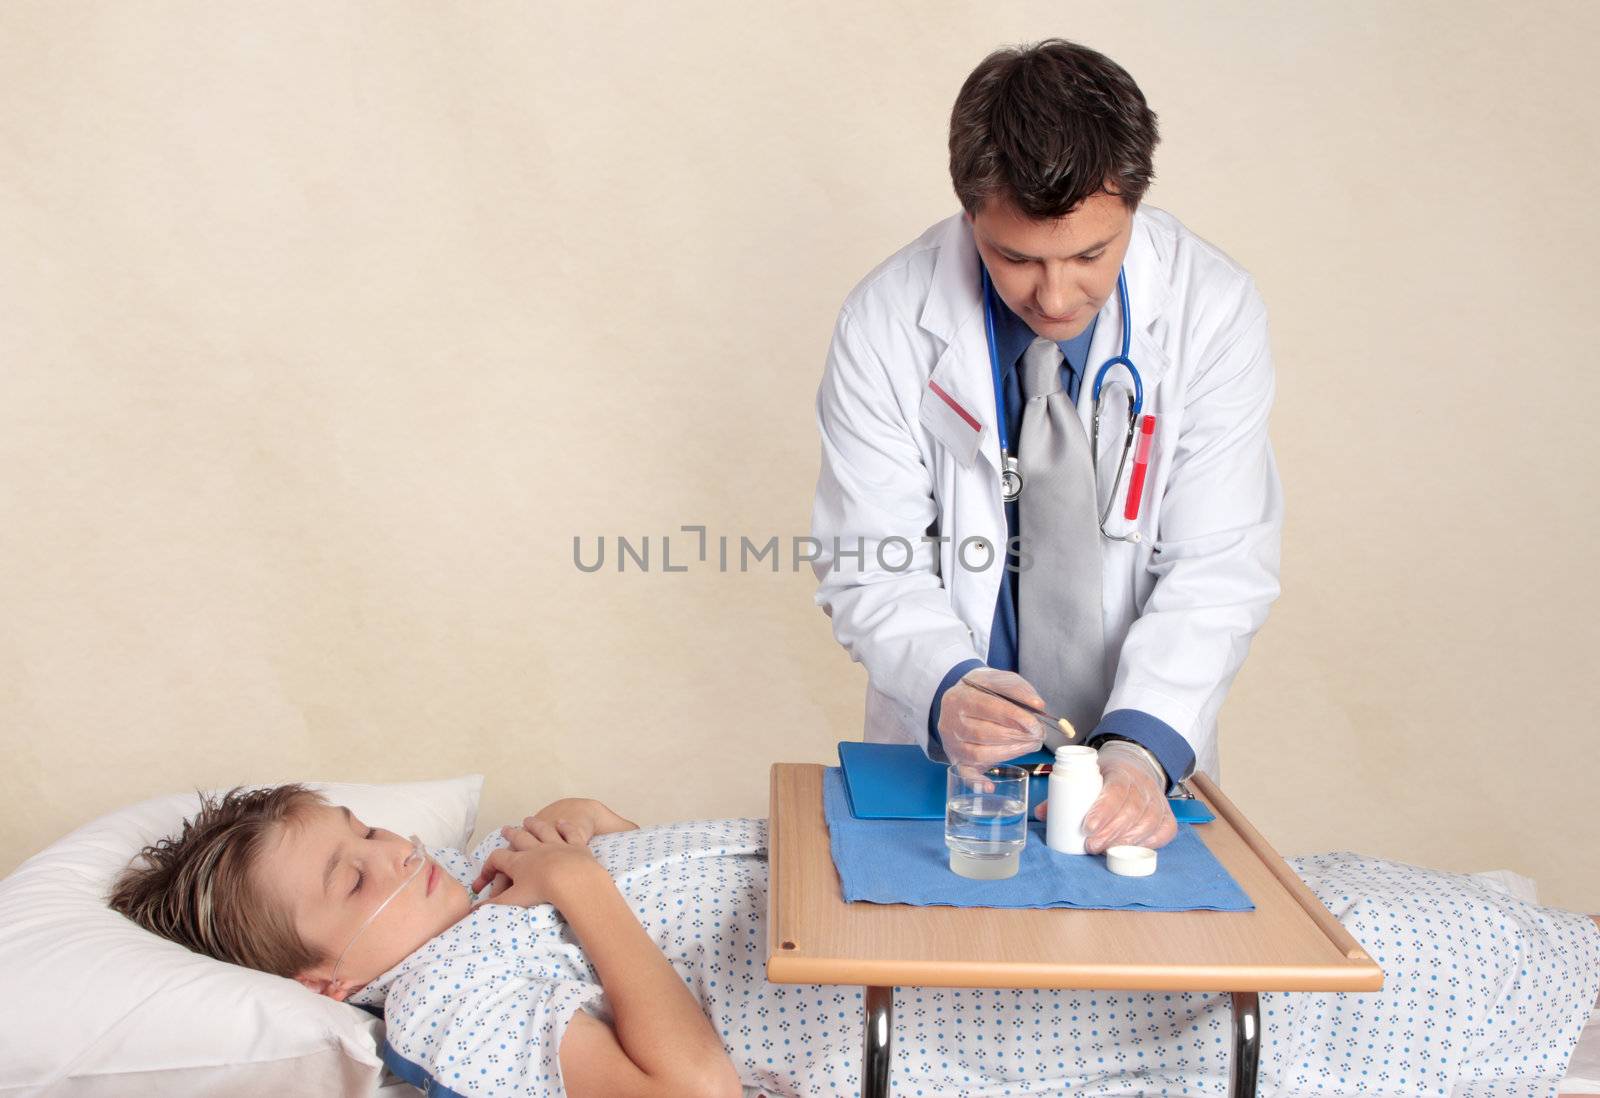 A doctor preparing the medication for a sick child